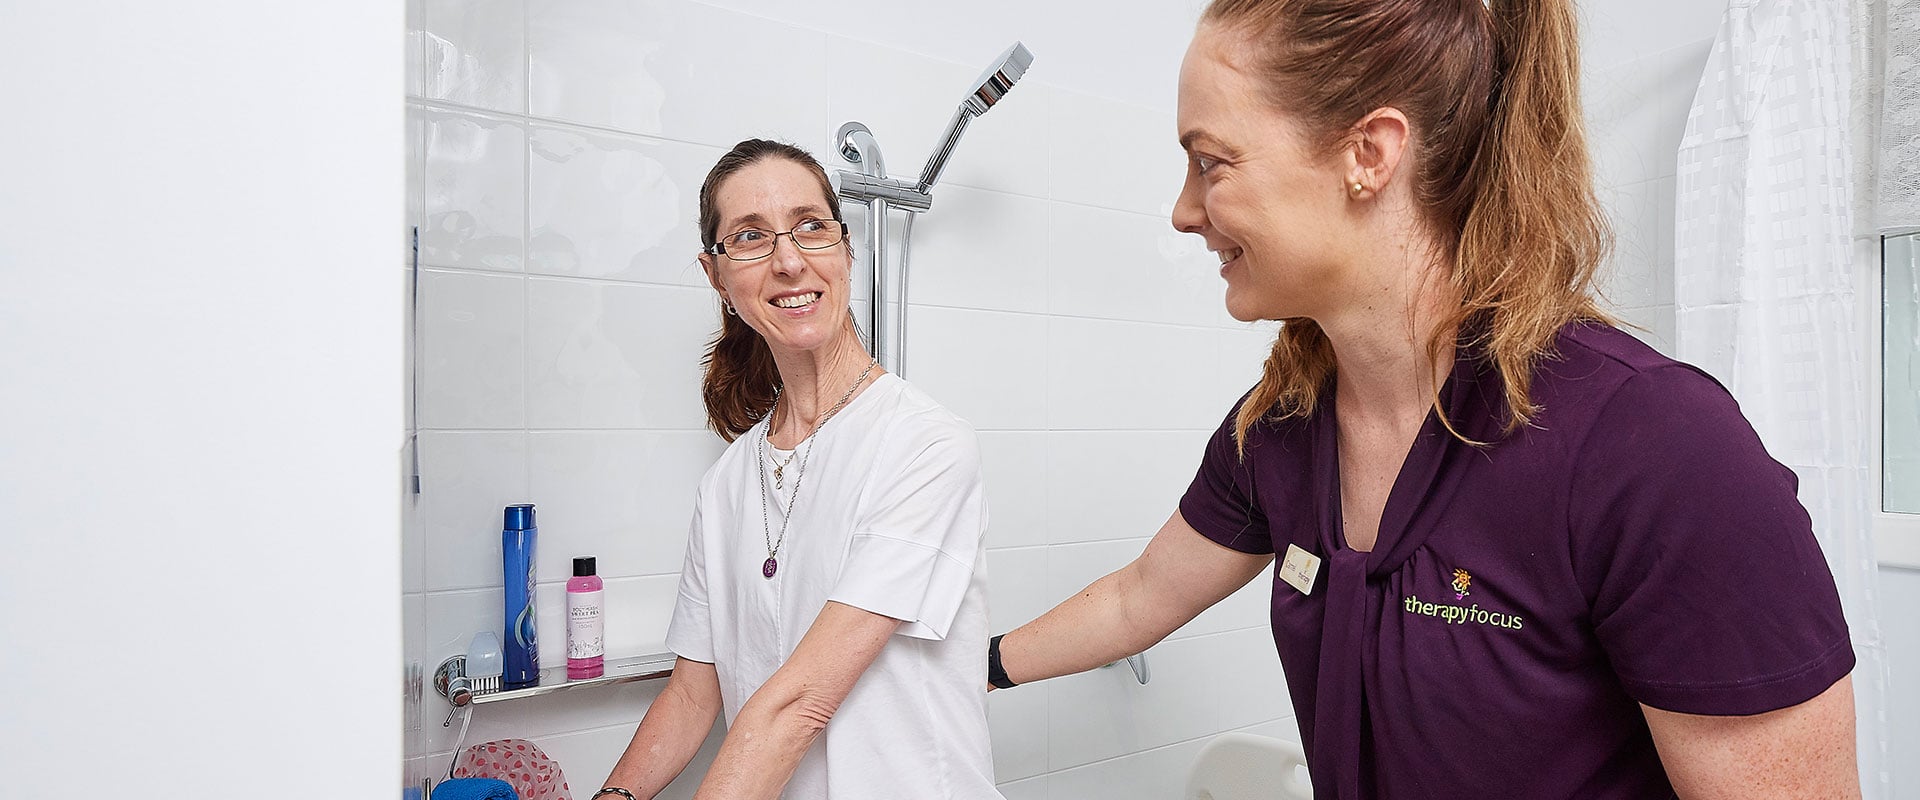 Therapist supports client holding shower rail in bathroom